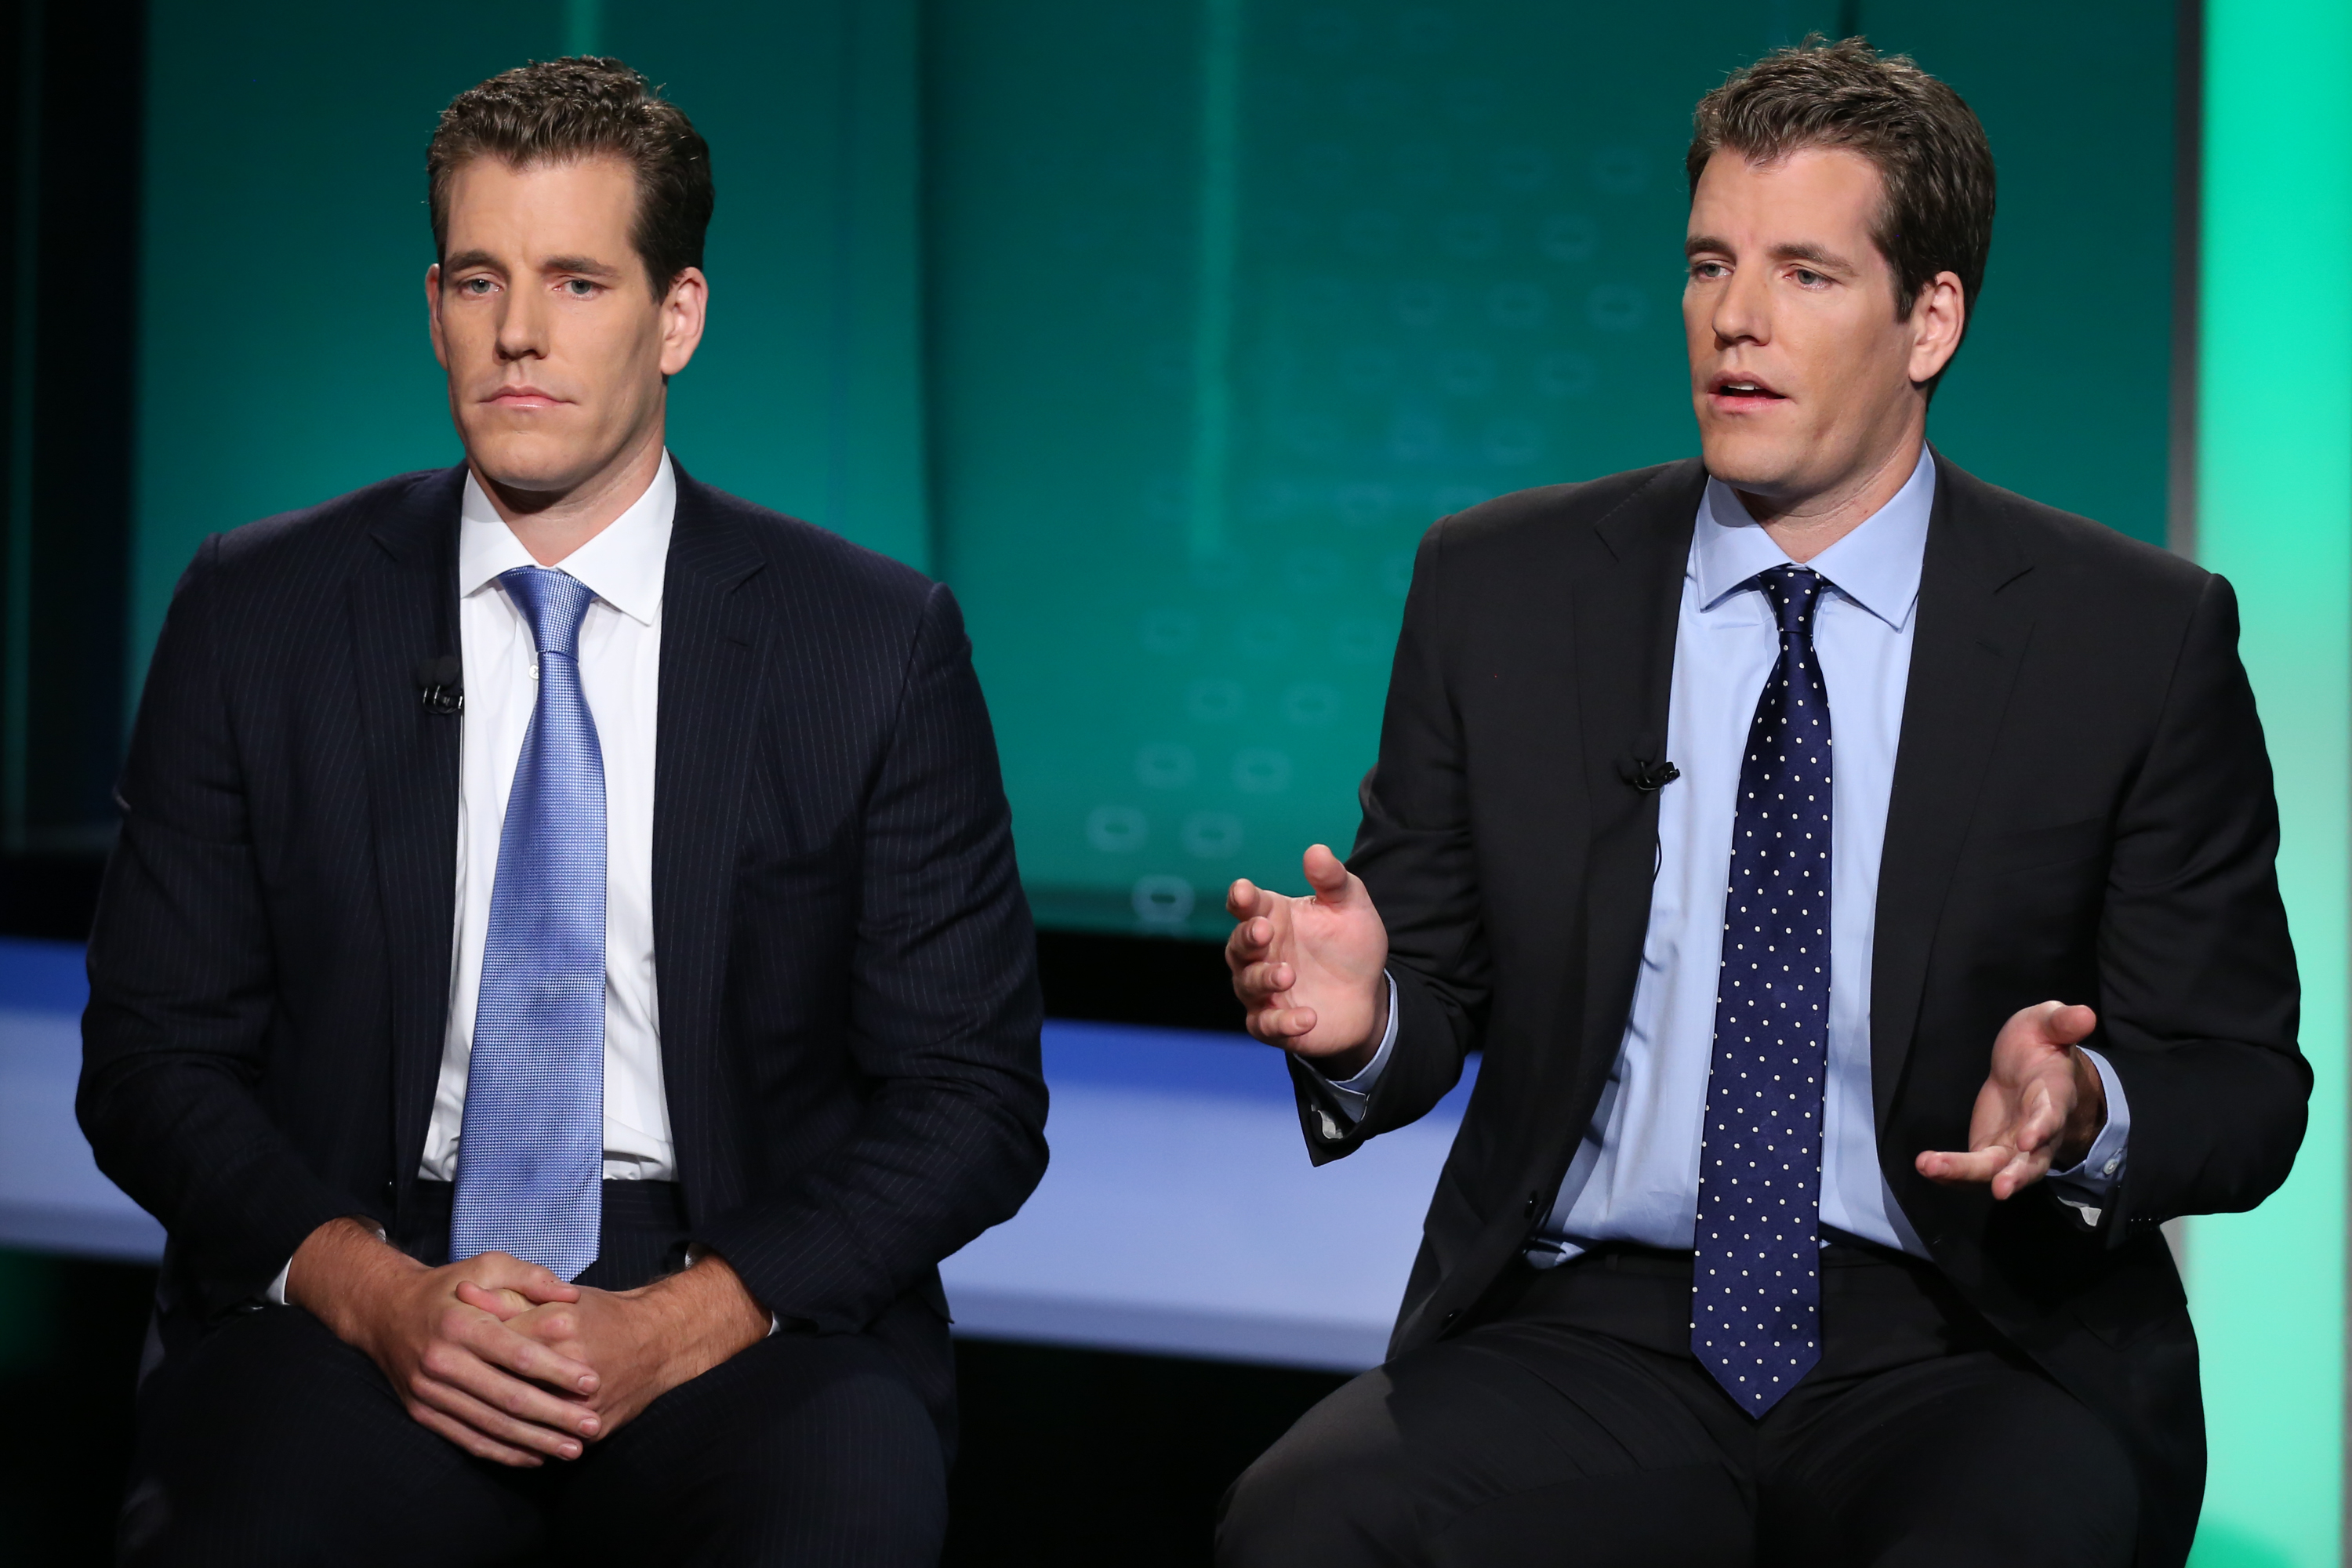 The Winklevoss Twins Now Appear to Be Bitcoin Billionaires